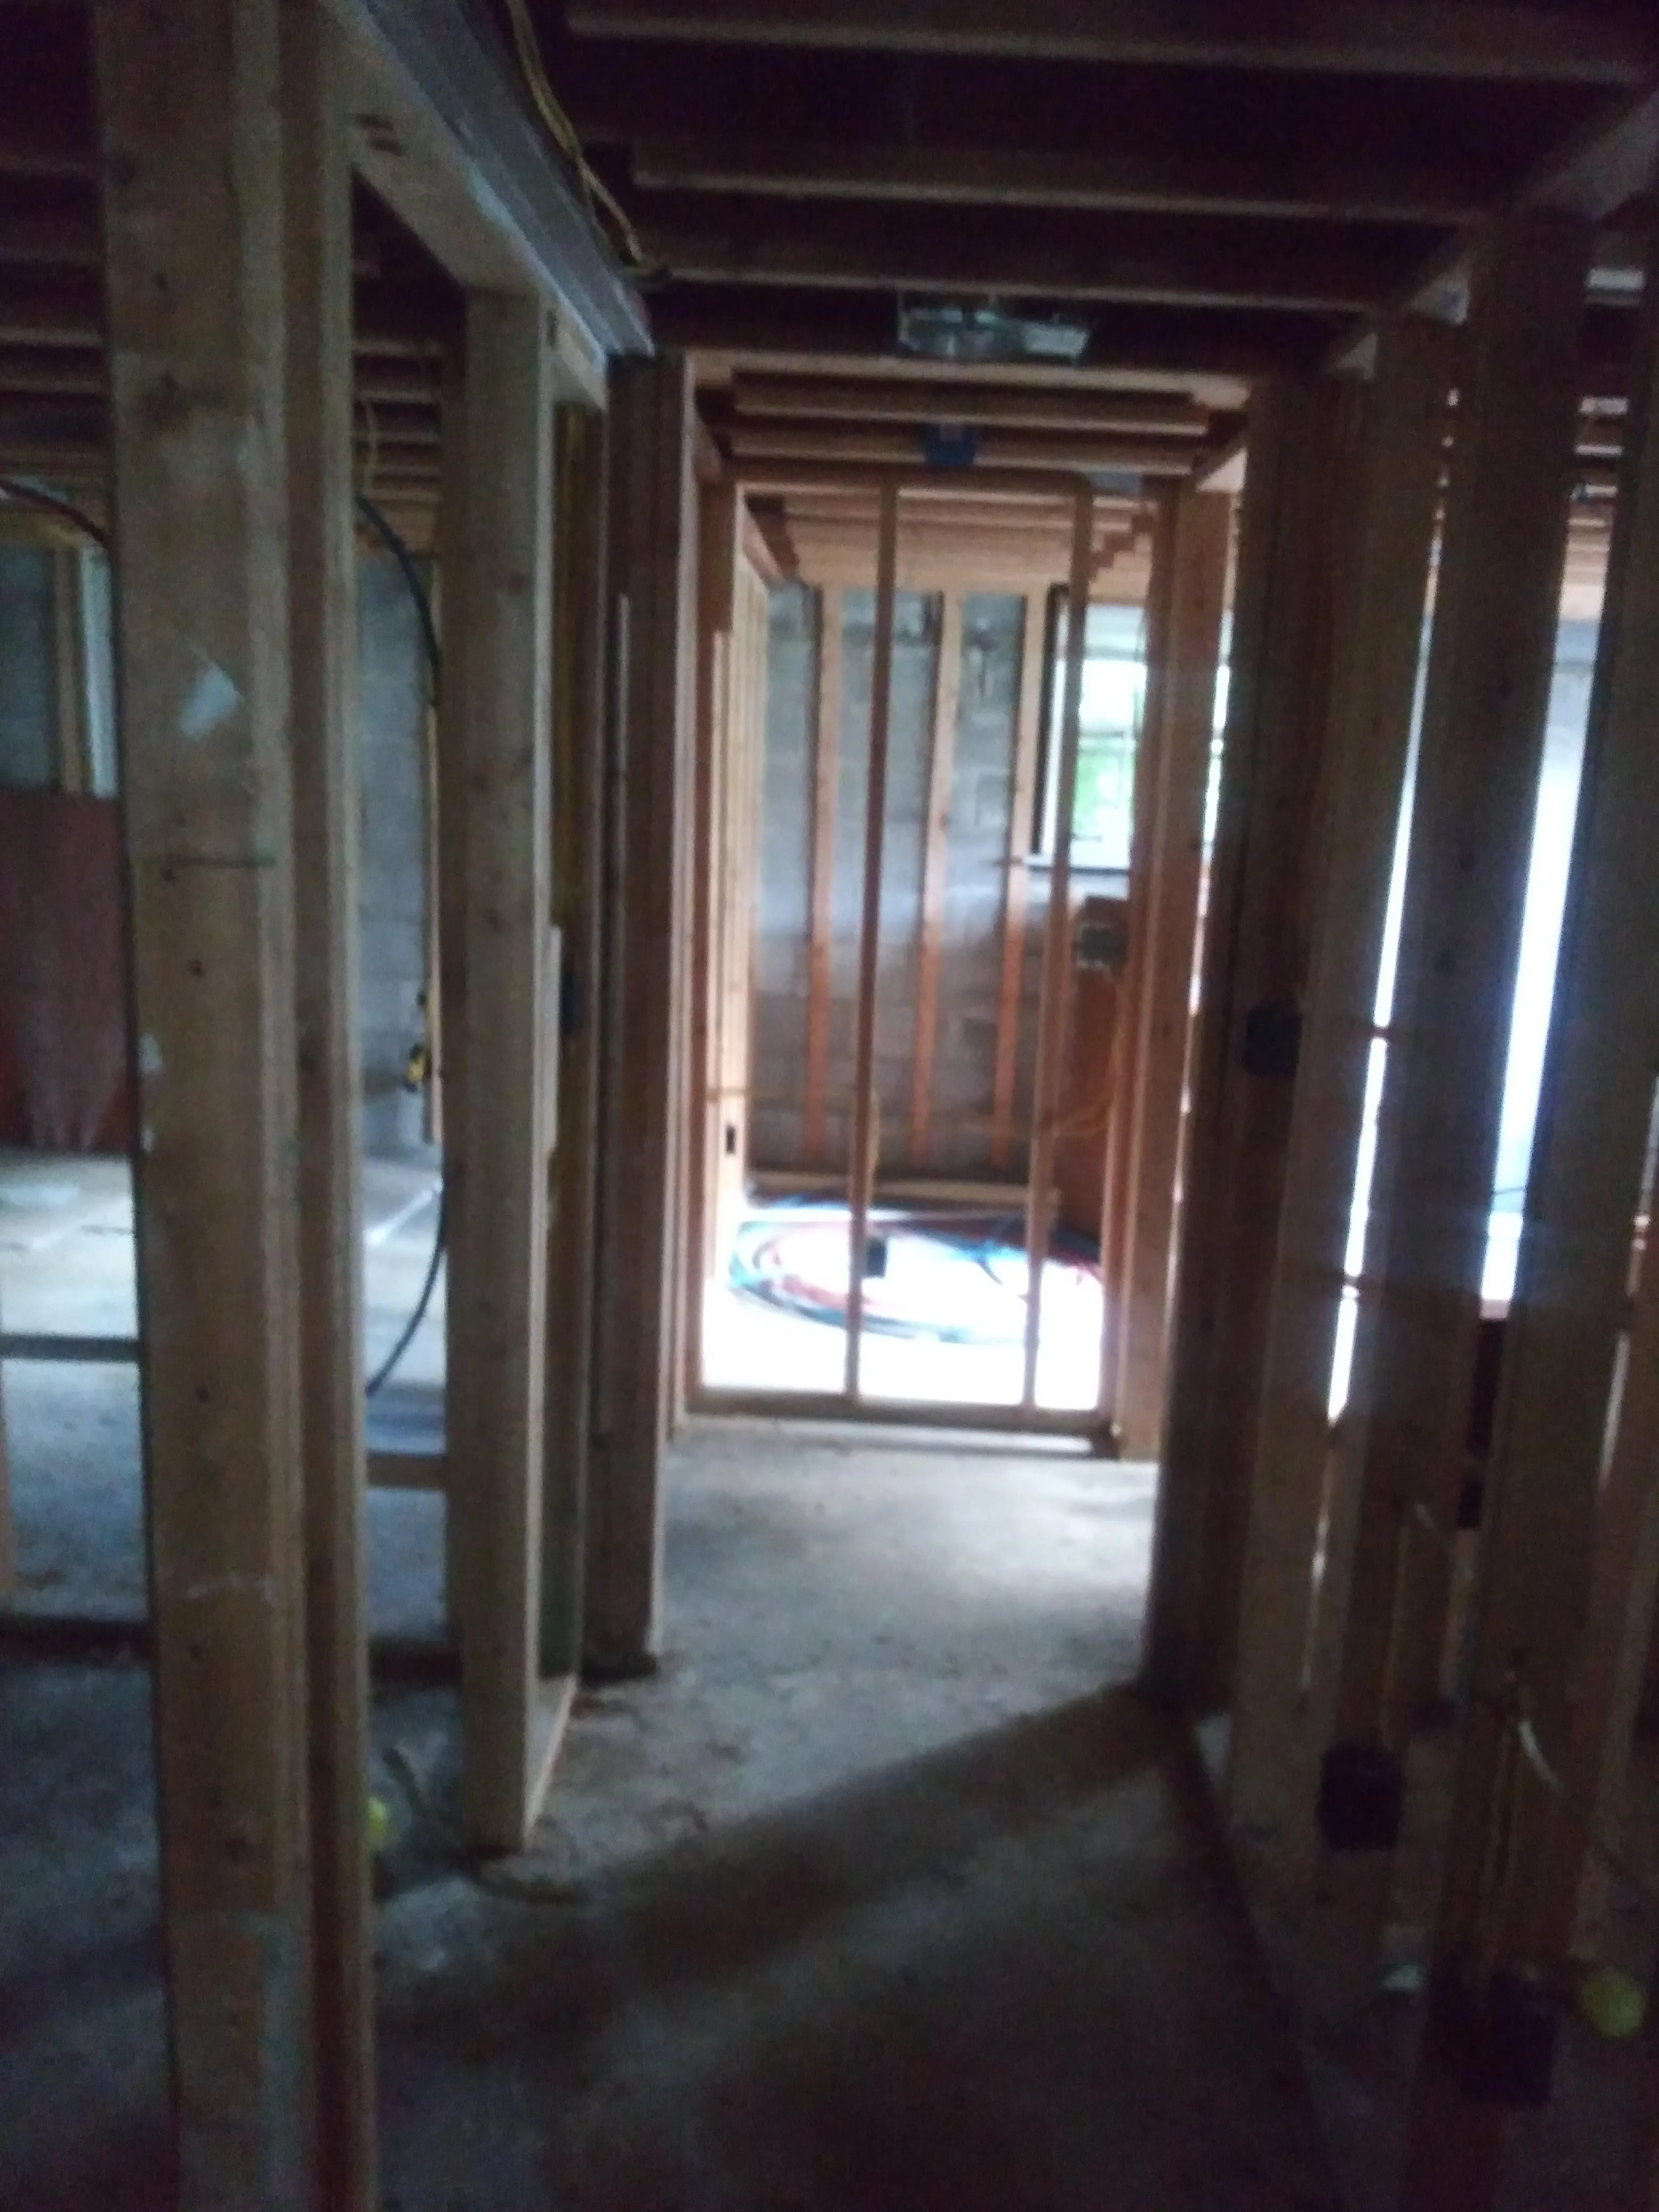 Commercial Rennovation for Integrity Home Improvements & Renovations in Columbia, Tennessee